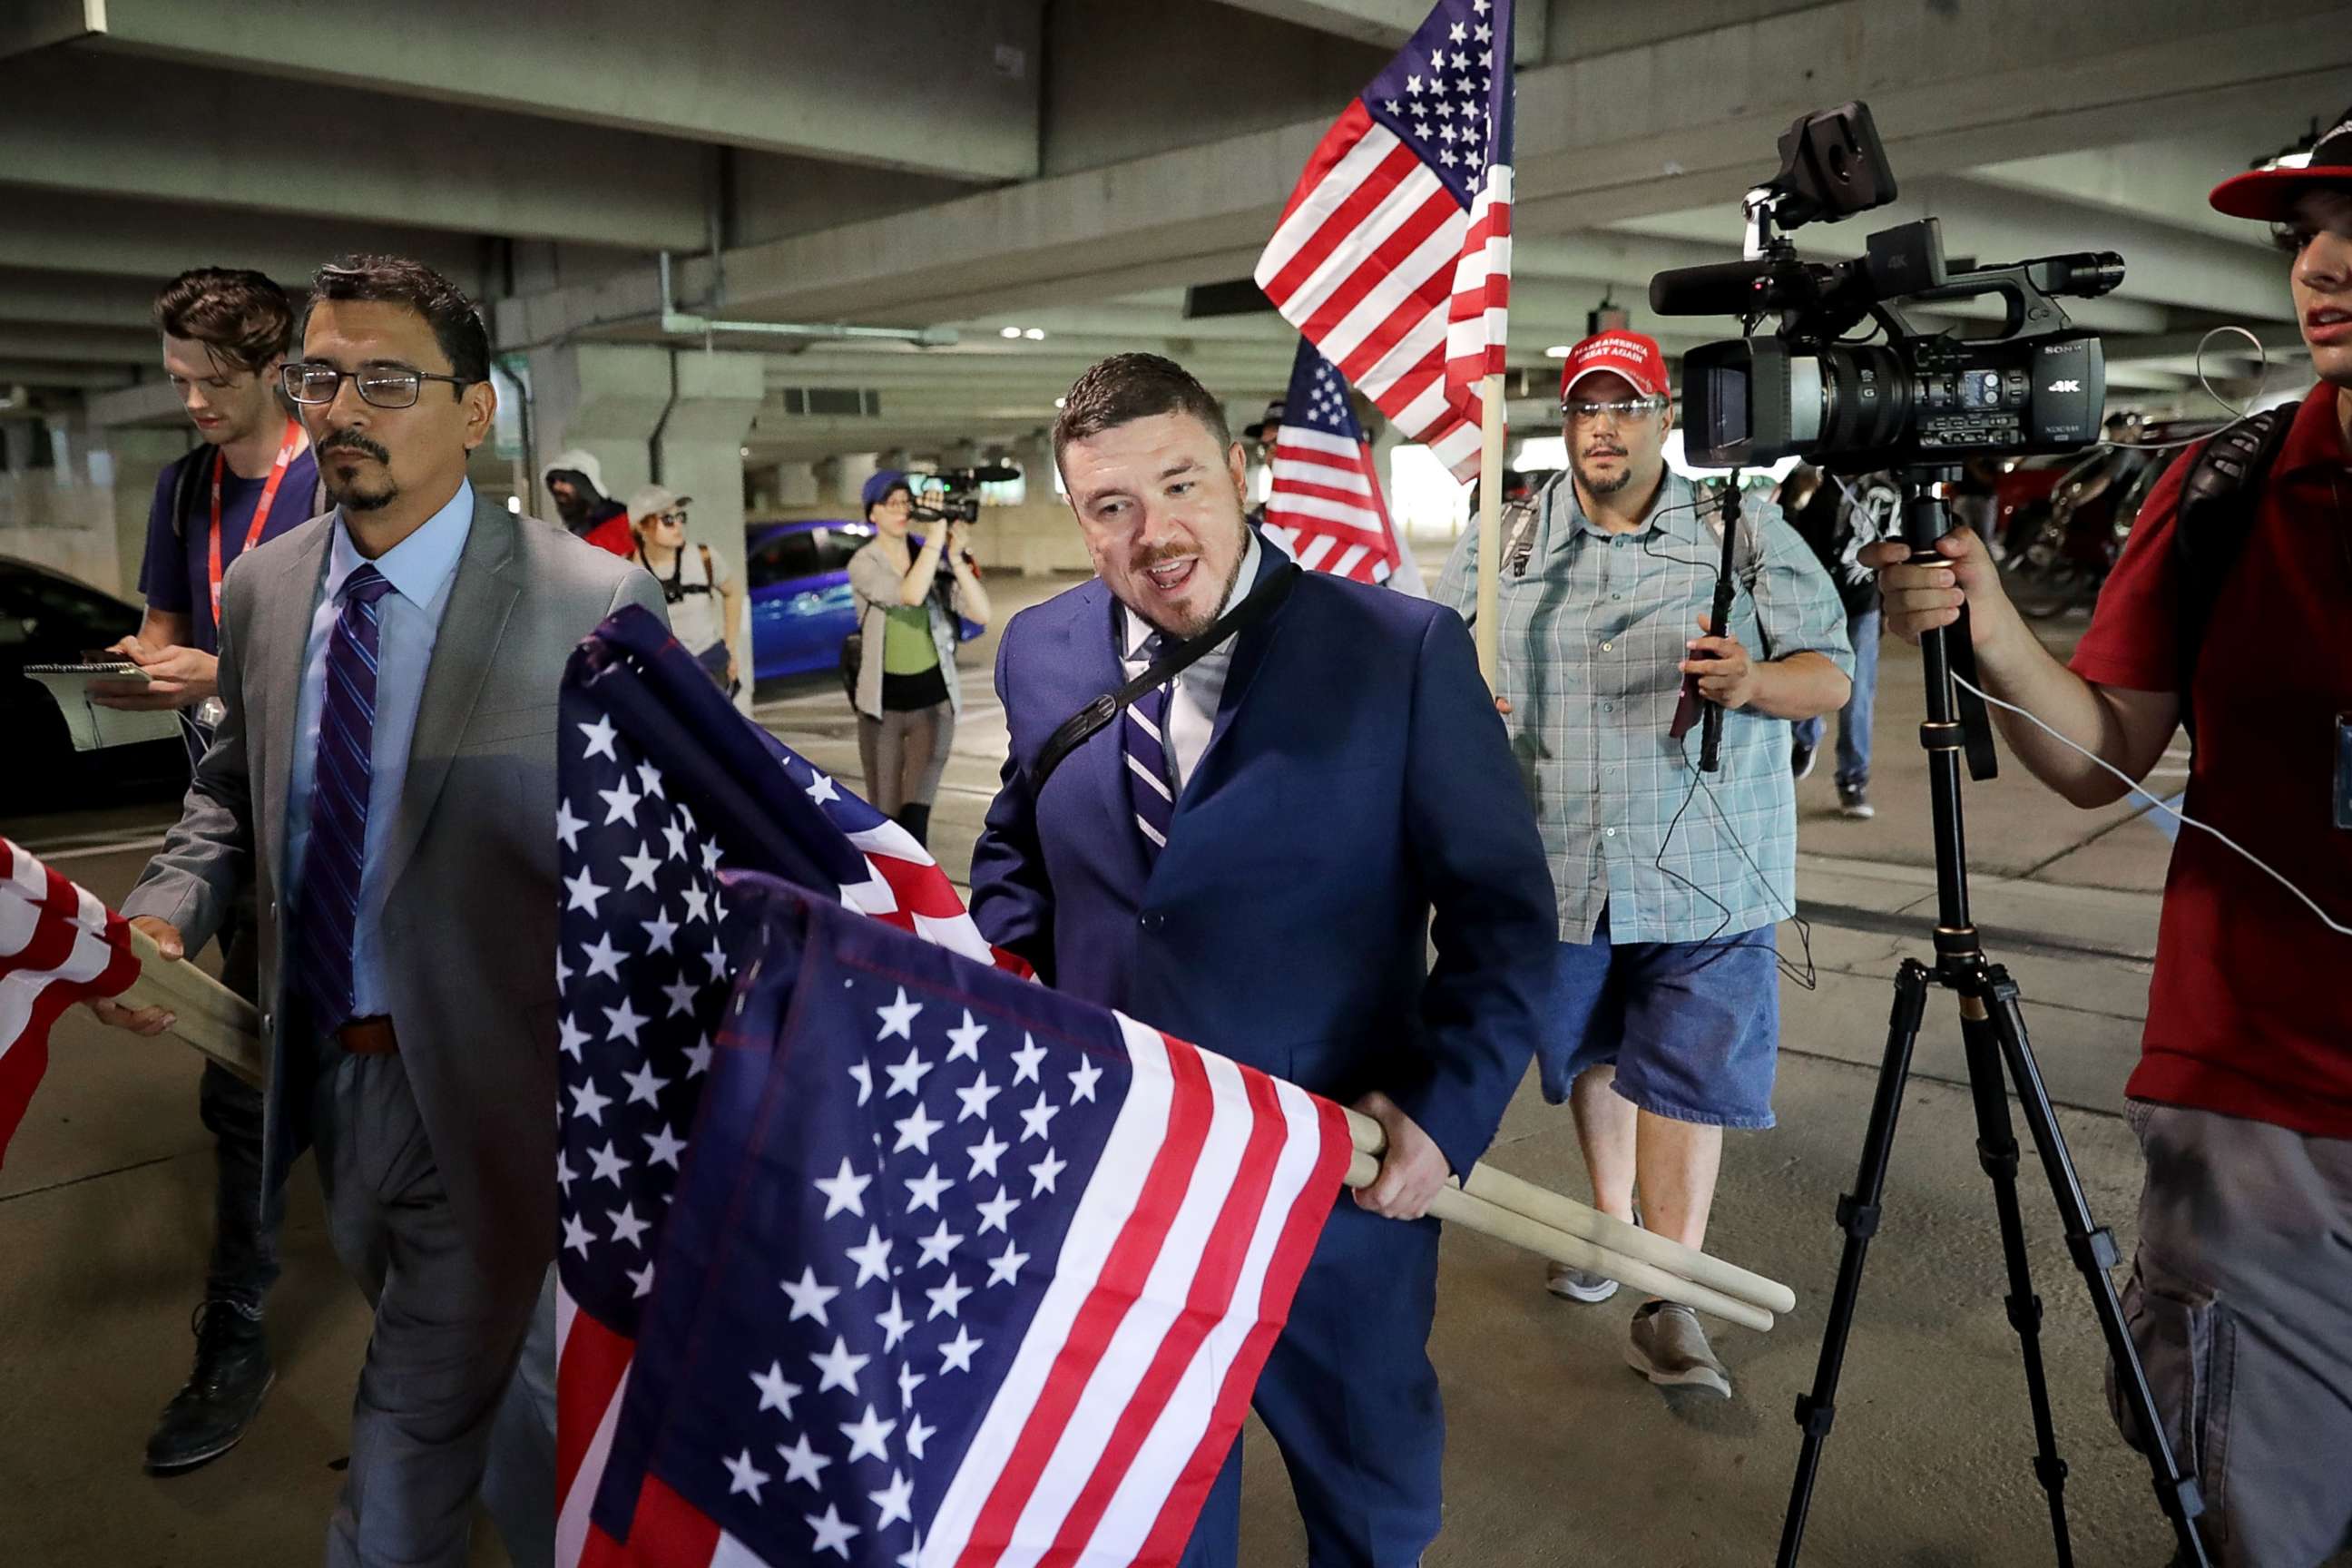 PHOTO: Surrounded by his supporters, reporters, and Fairfax County Police, Jason Kessler walks toward the Vienna/Fairfax GMU Metro Station to travel to the White House for his "Unite the Right" rally, Aug. 12, 2018, in Vienna, Virginia.